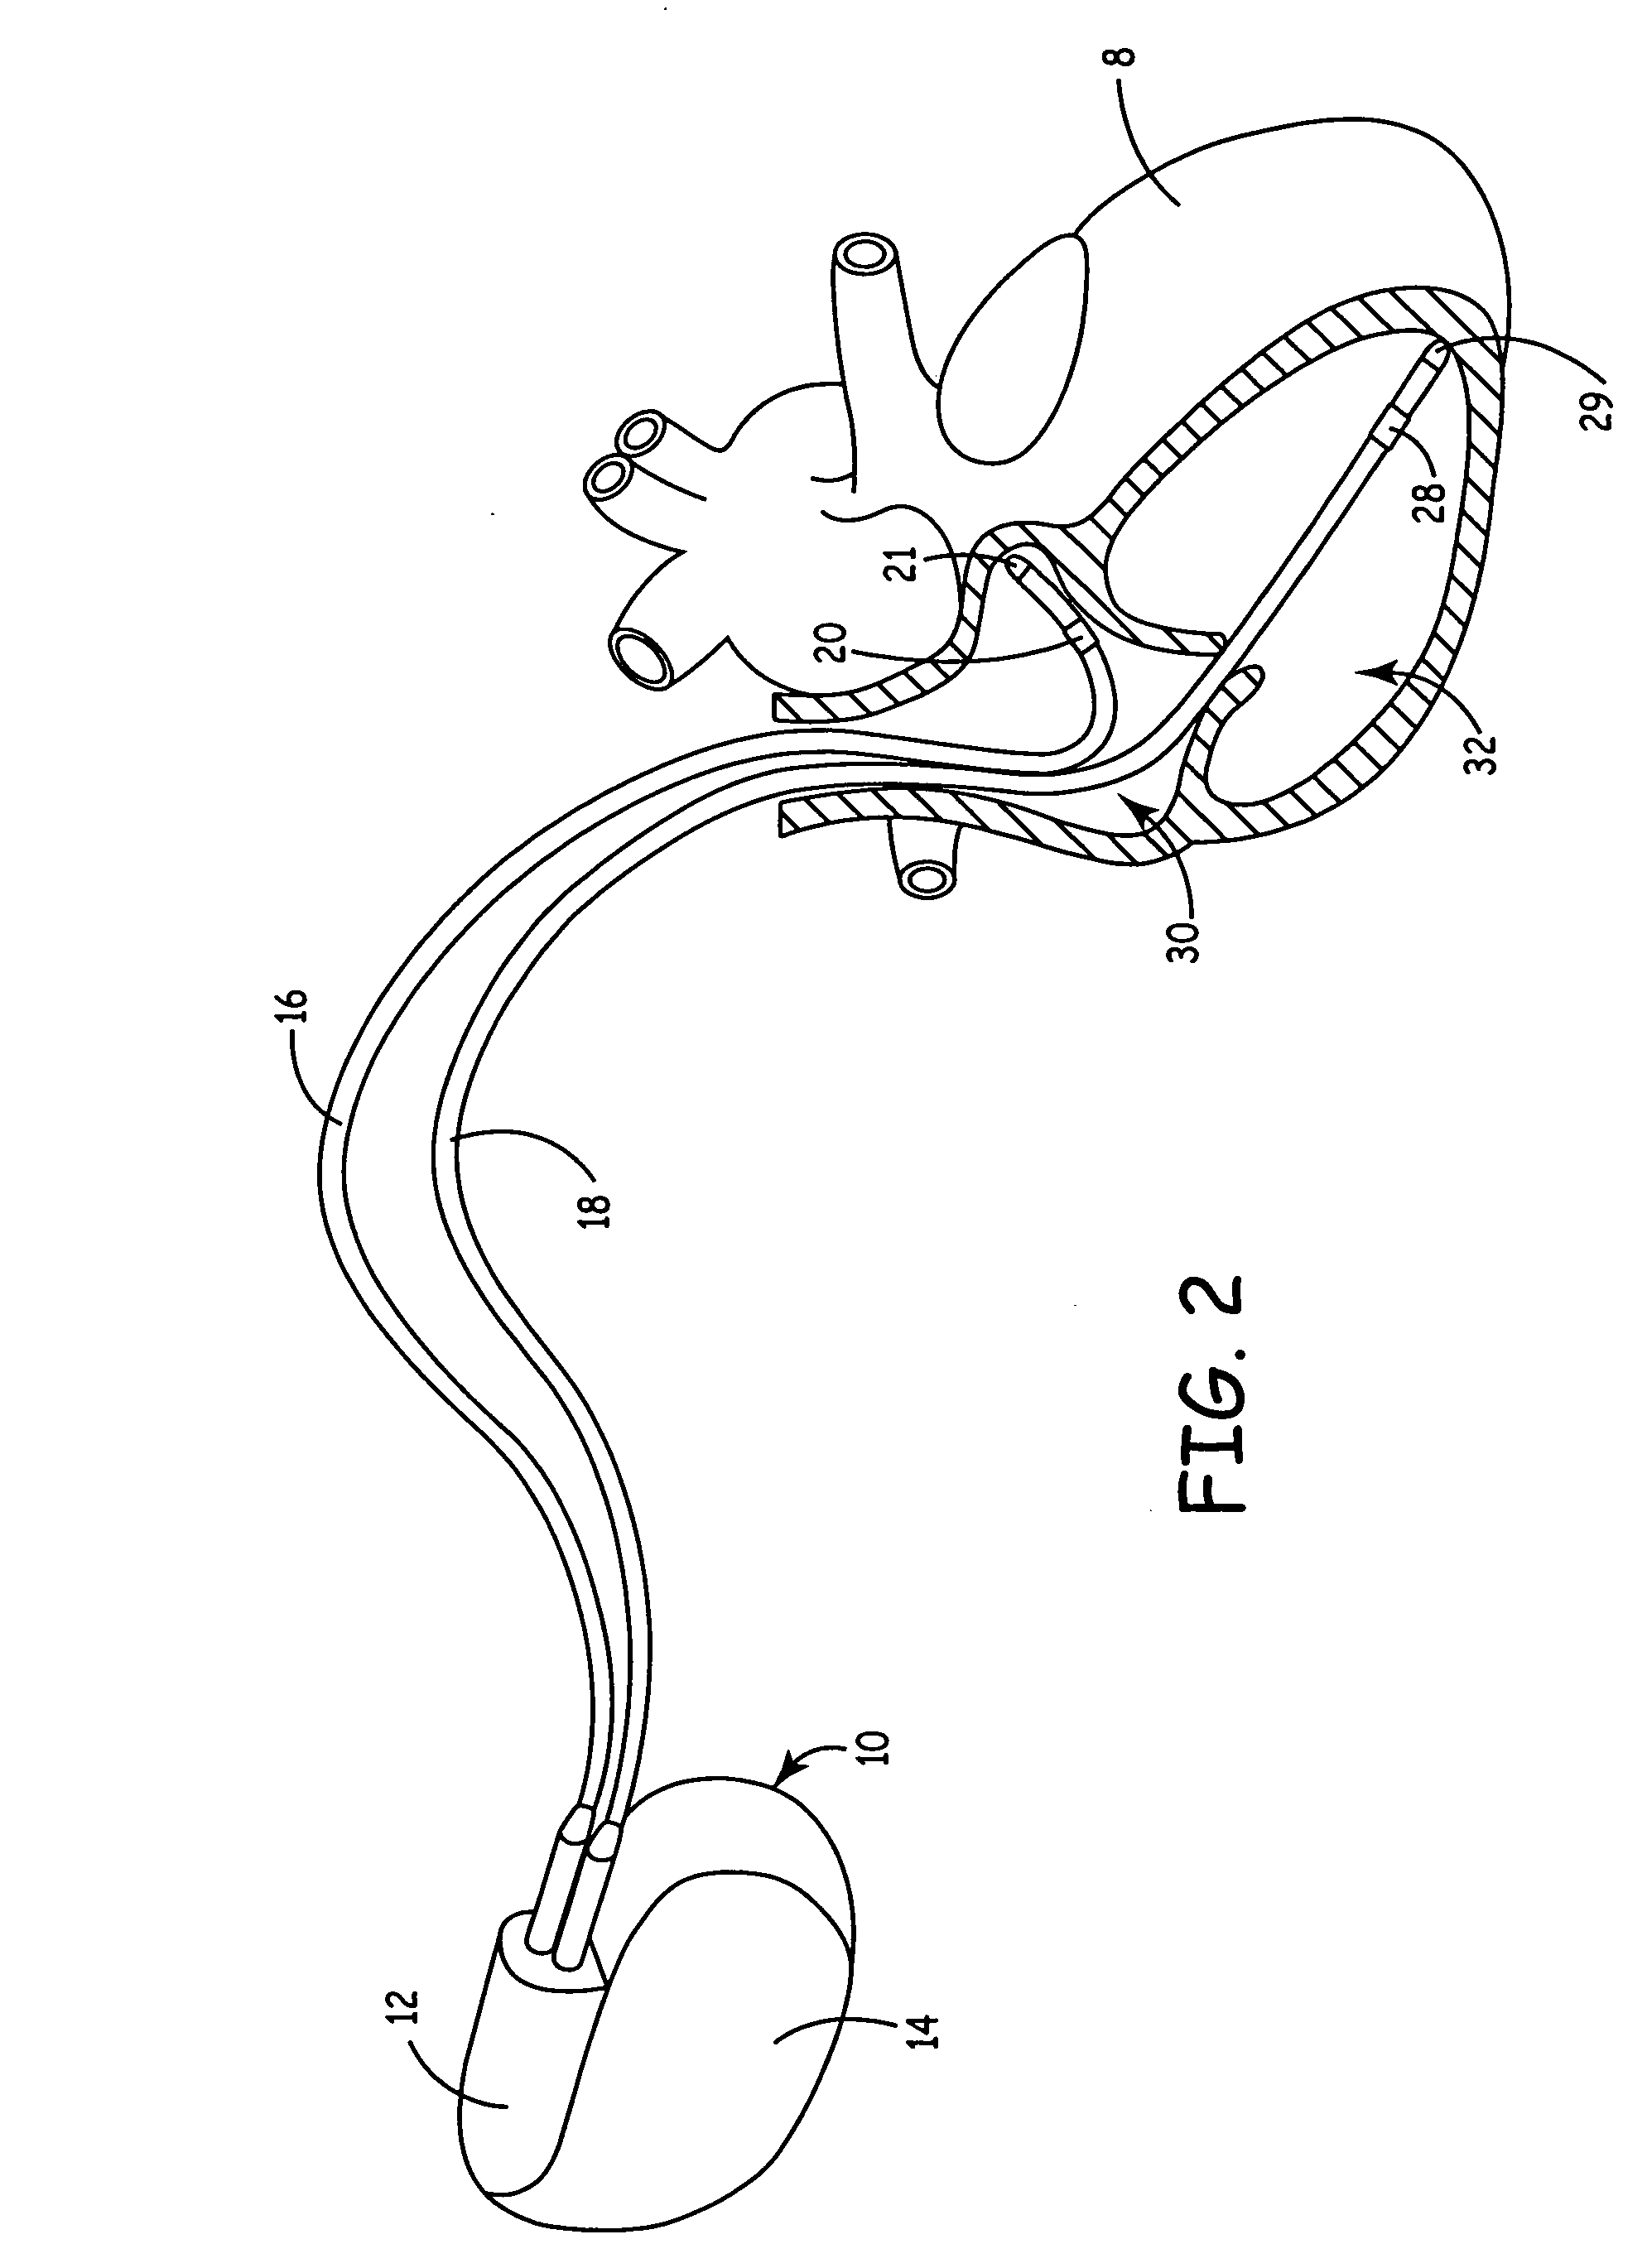 Implantable medical device with ventricular pacing protocol including progressive conduction search